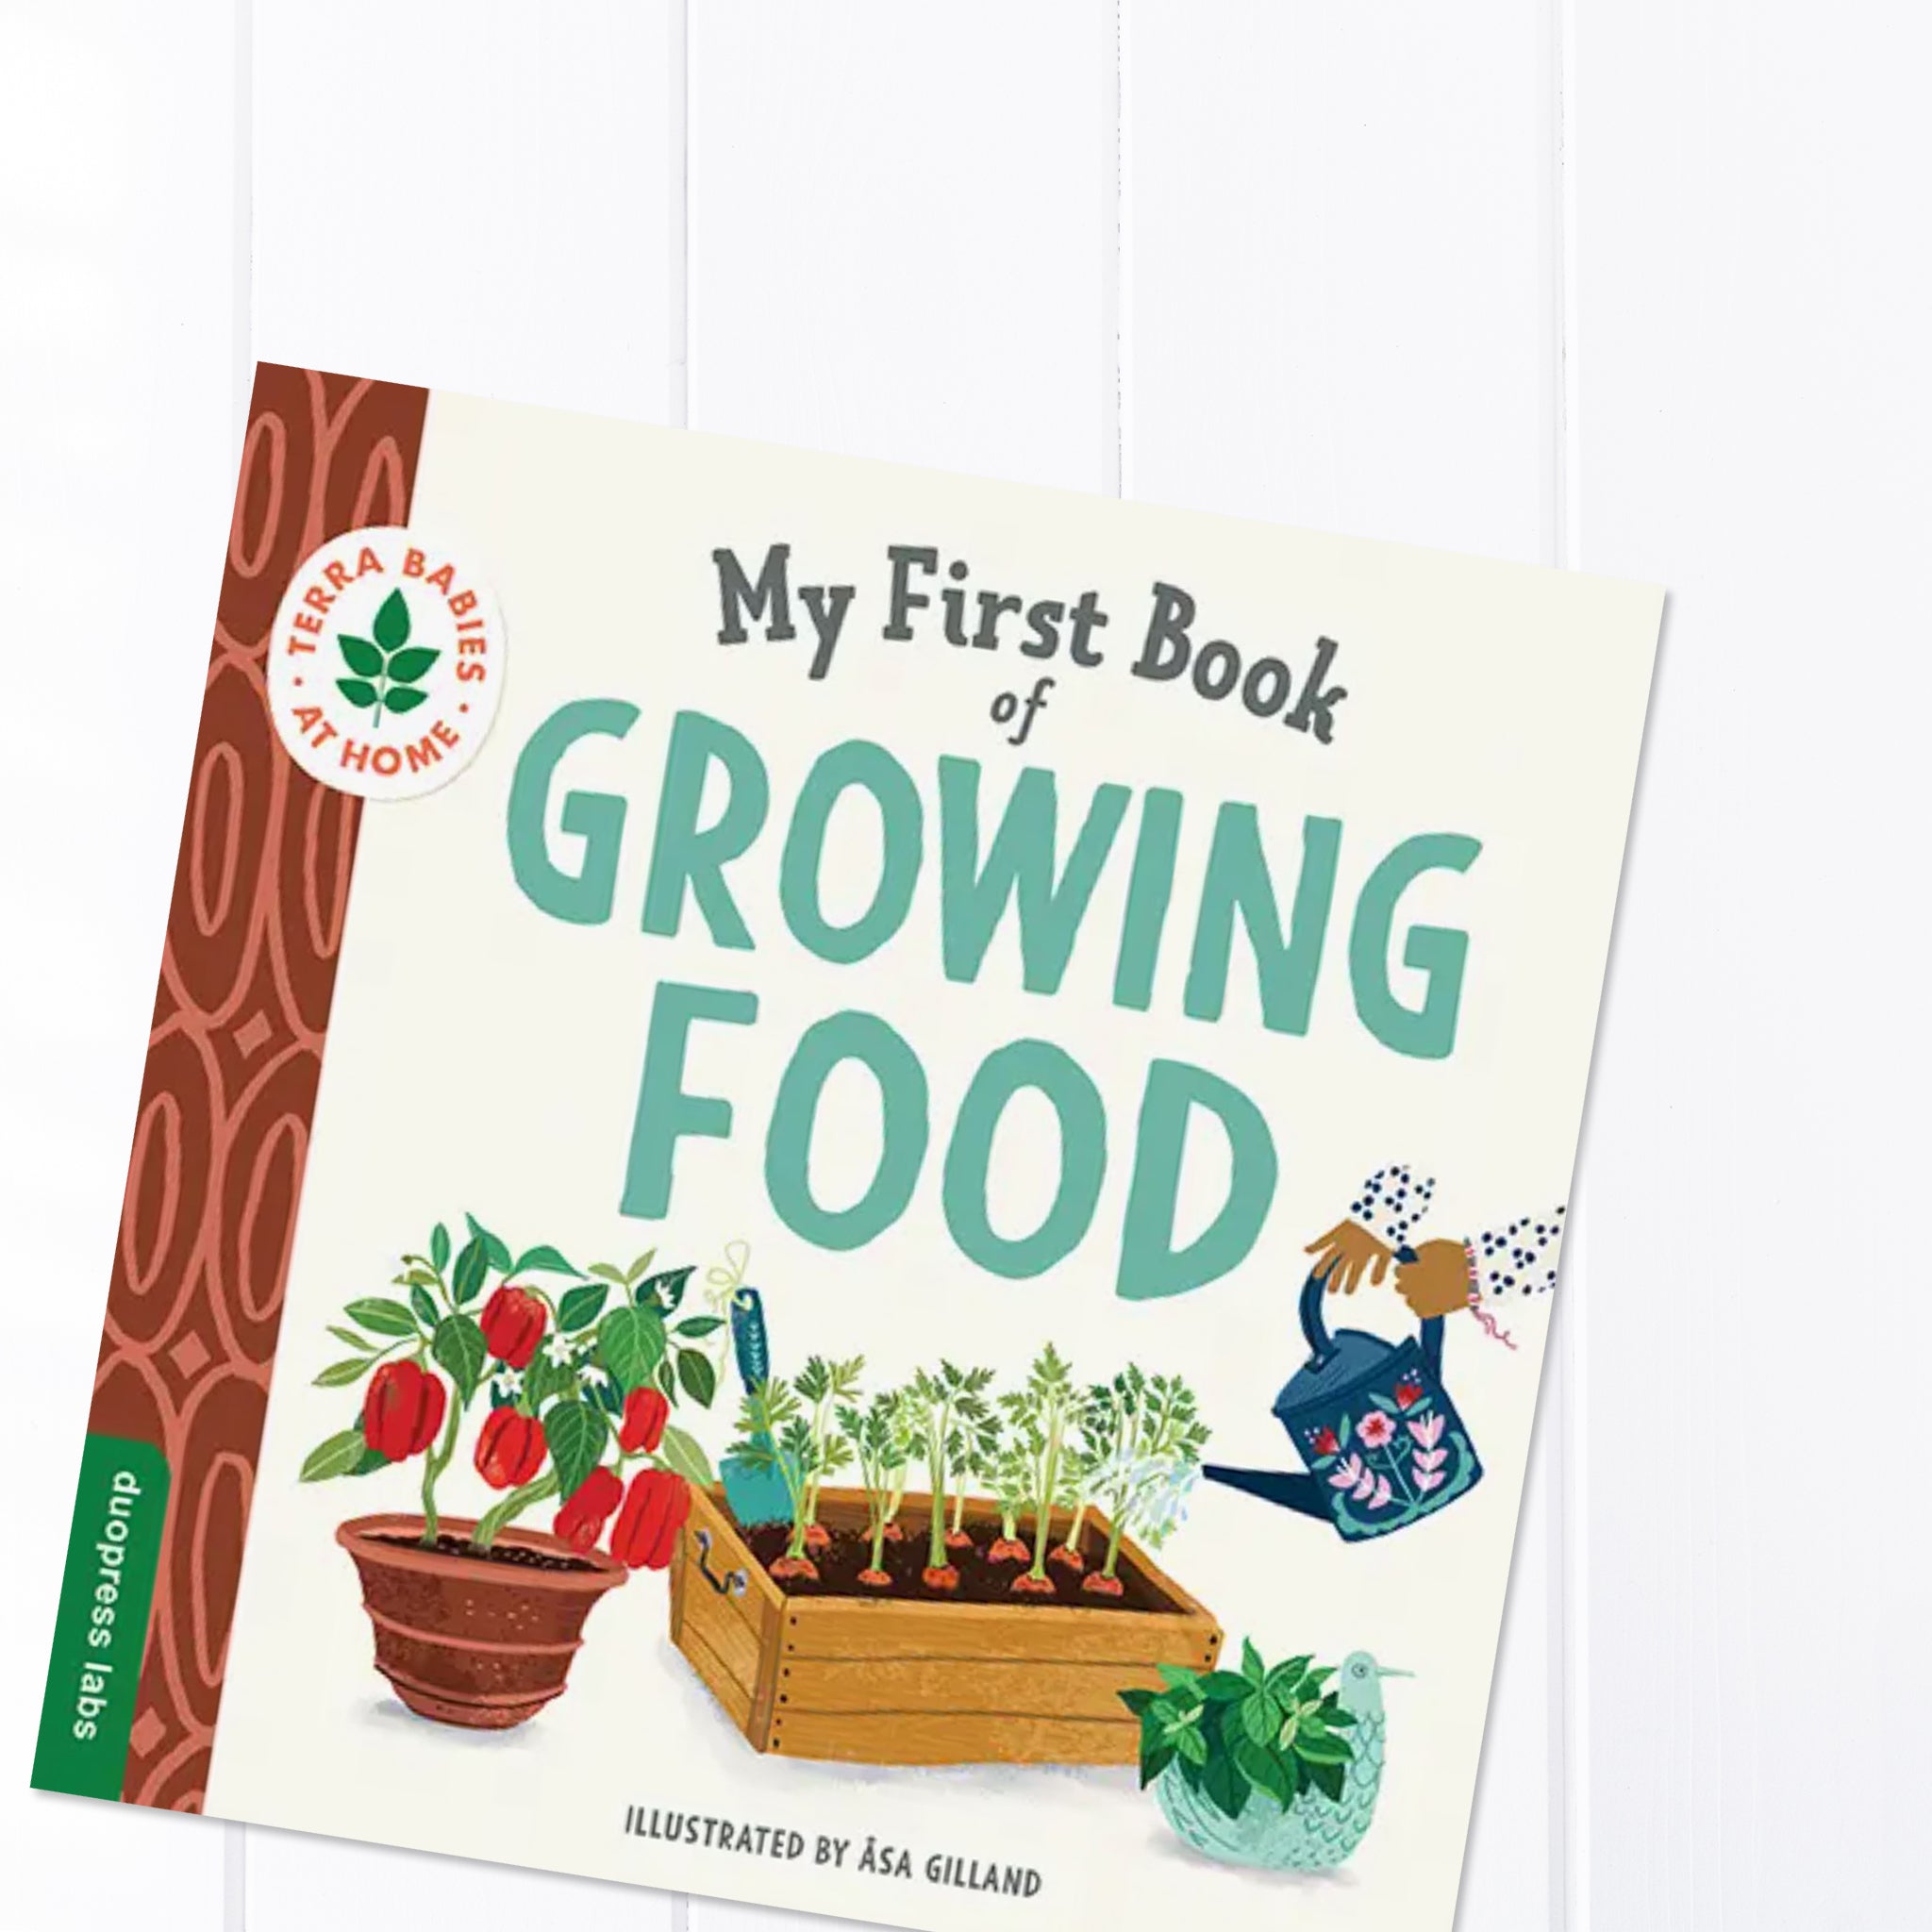 My First Book of Growing Food